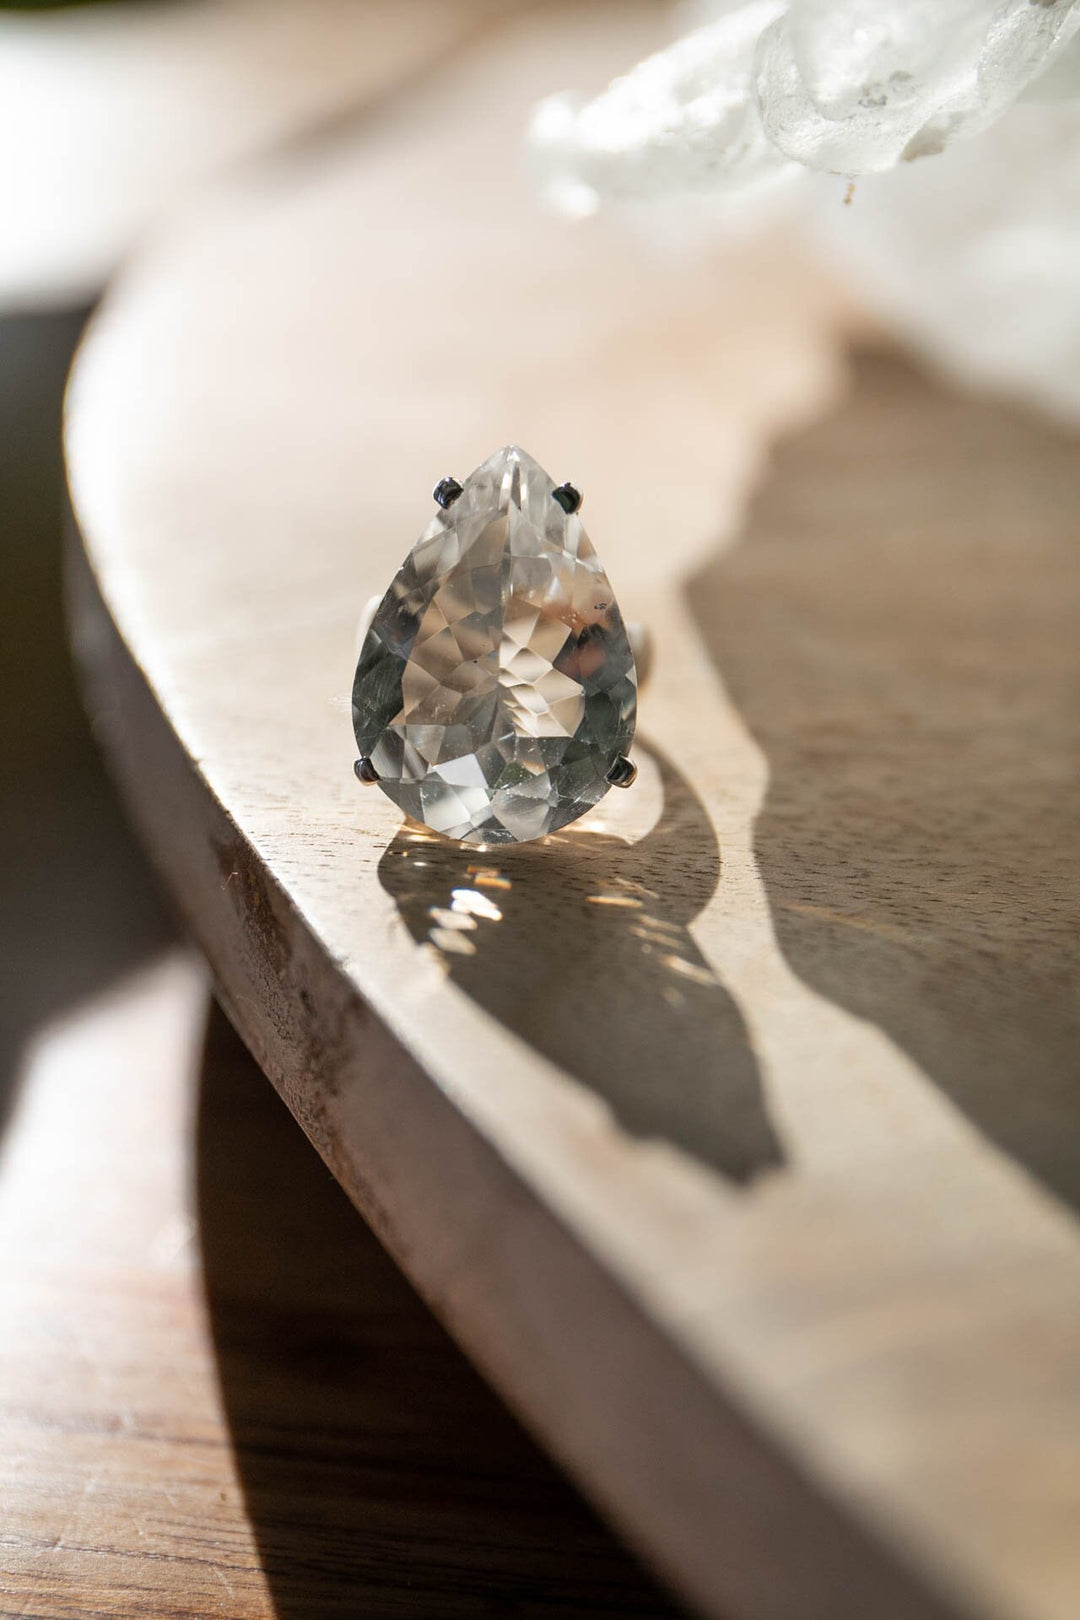 Faceted Teardrop Clear Crystal Quartz Ring set in Sterling Silver - Size 7 US